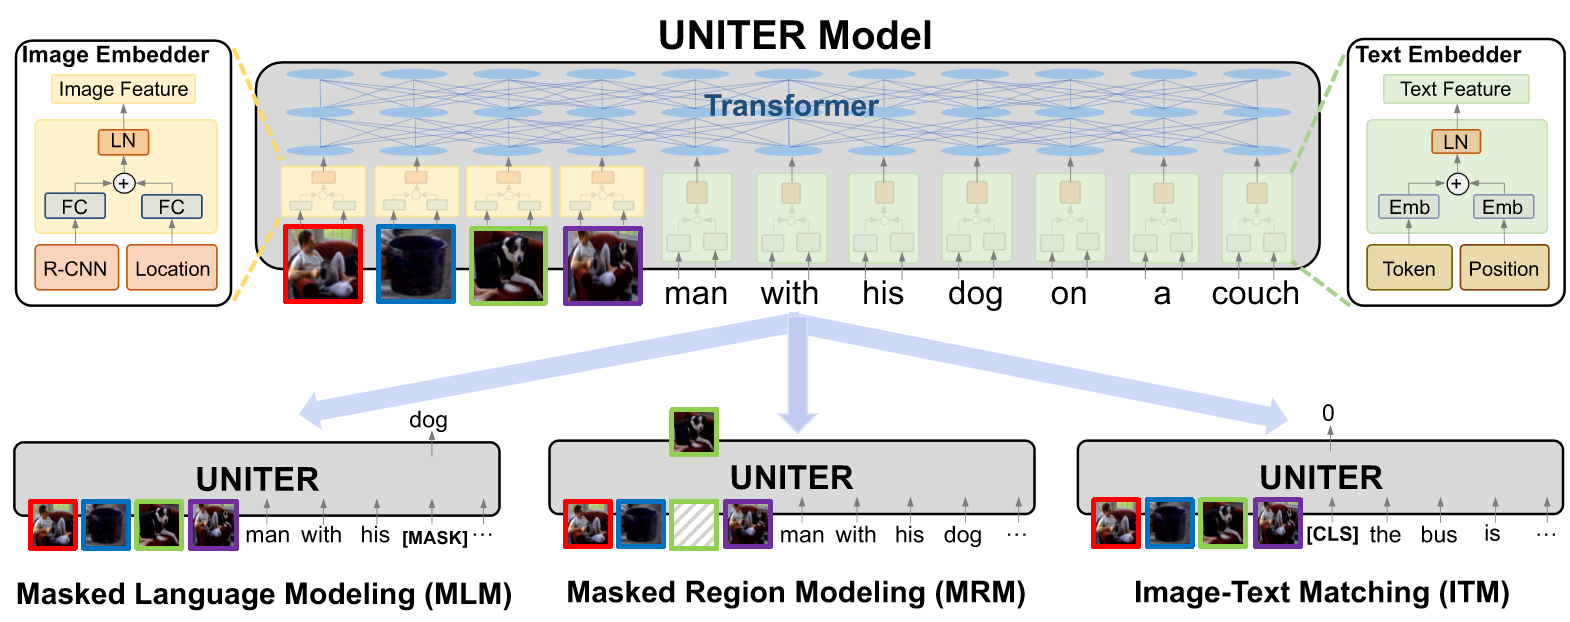 Overview of UNITER